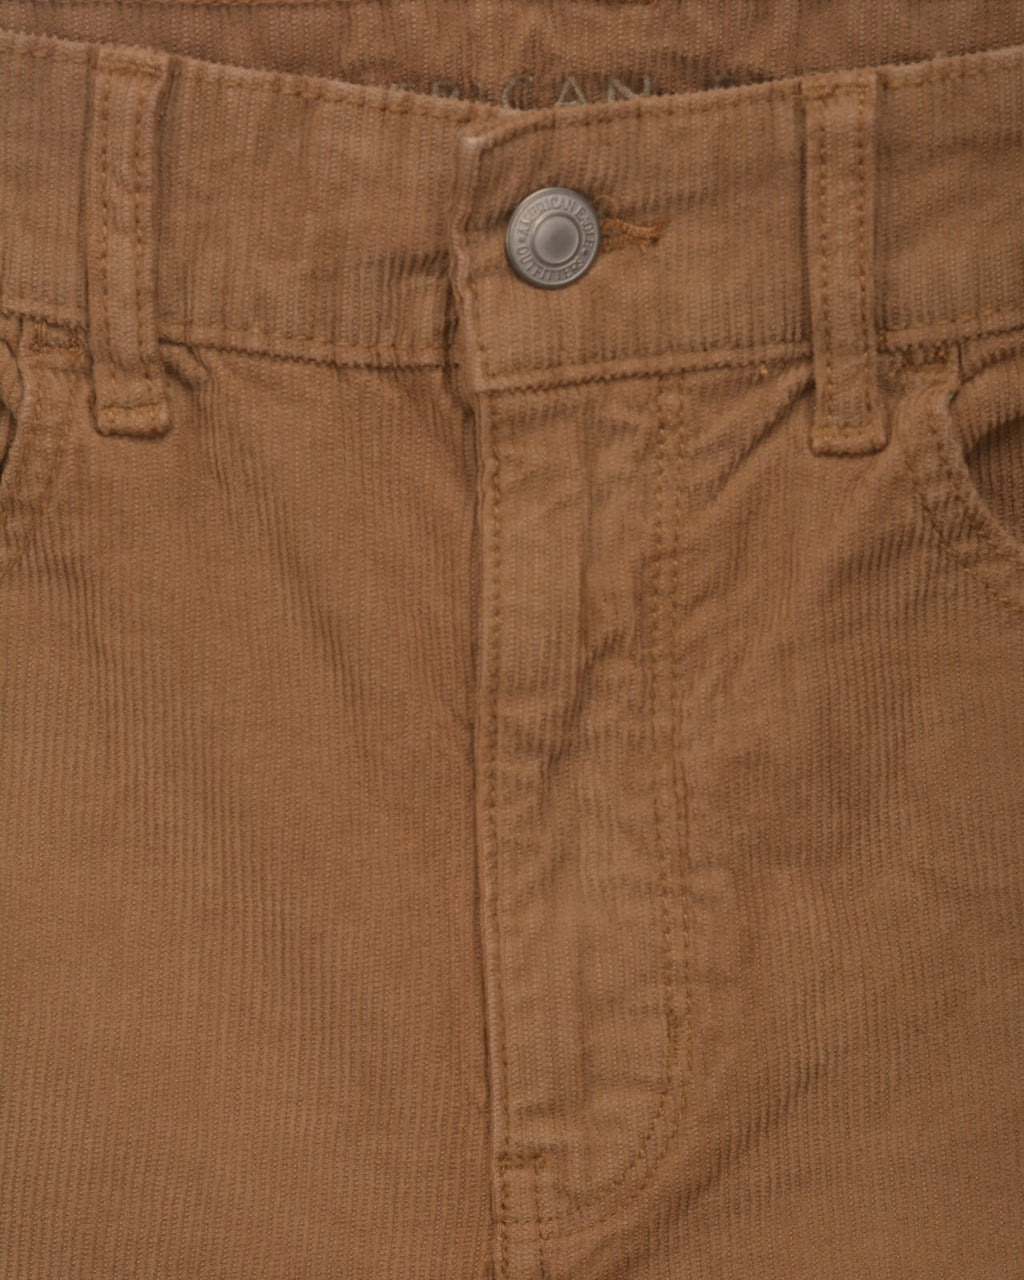 AE Corduroy Super High-Waisted Flare Pant LIGHT BROWN